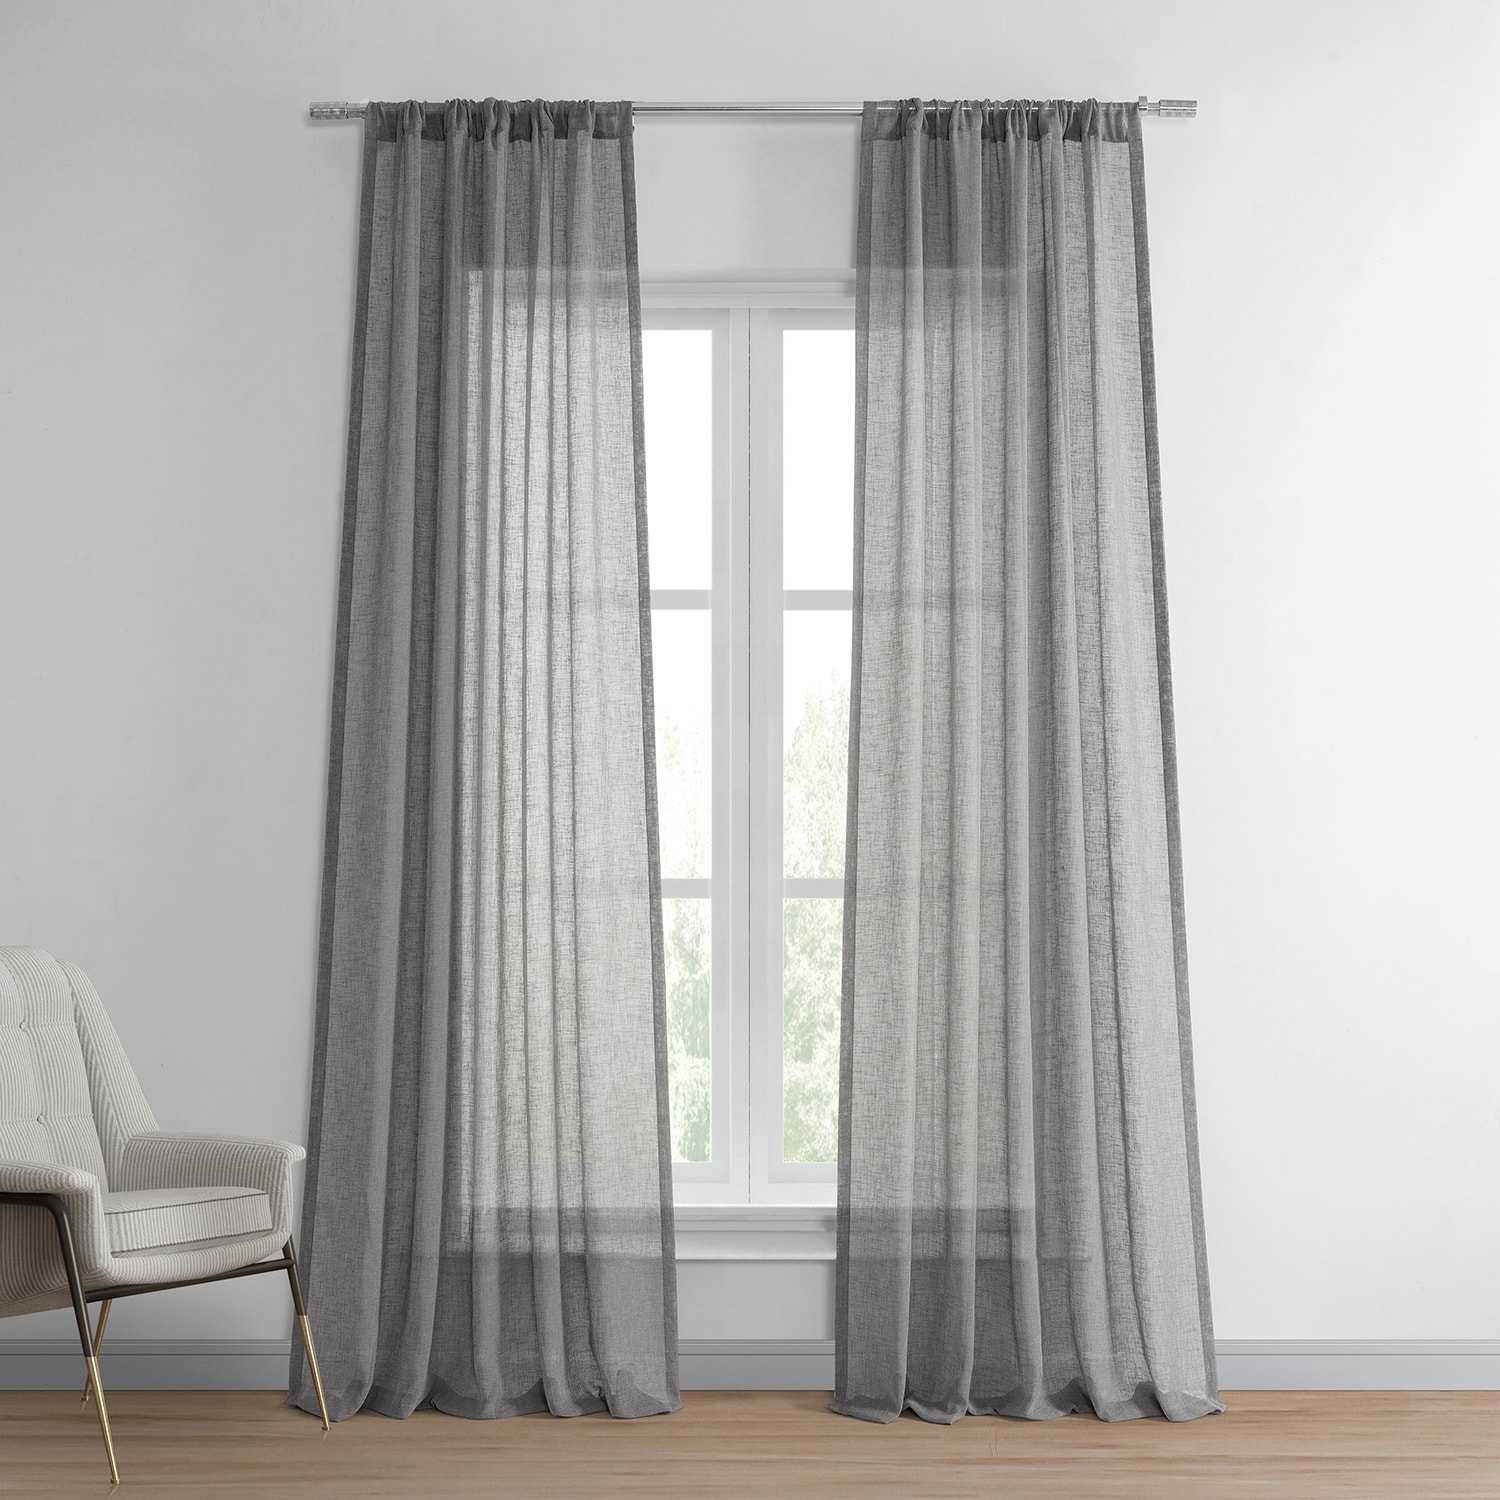 Gravel Grey Solid Faux Linen Sheer Curtain